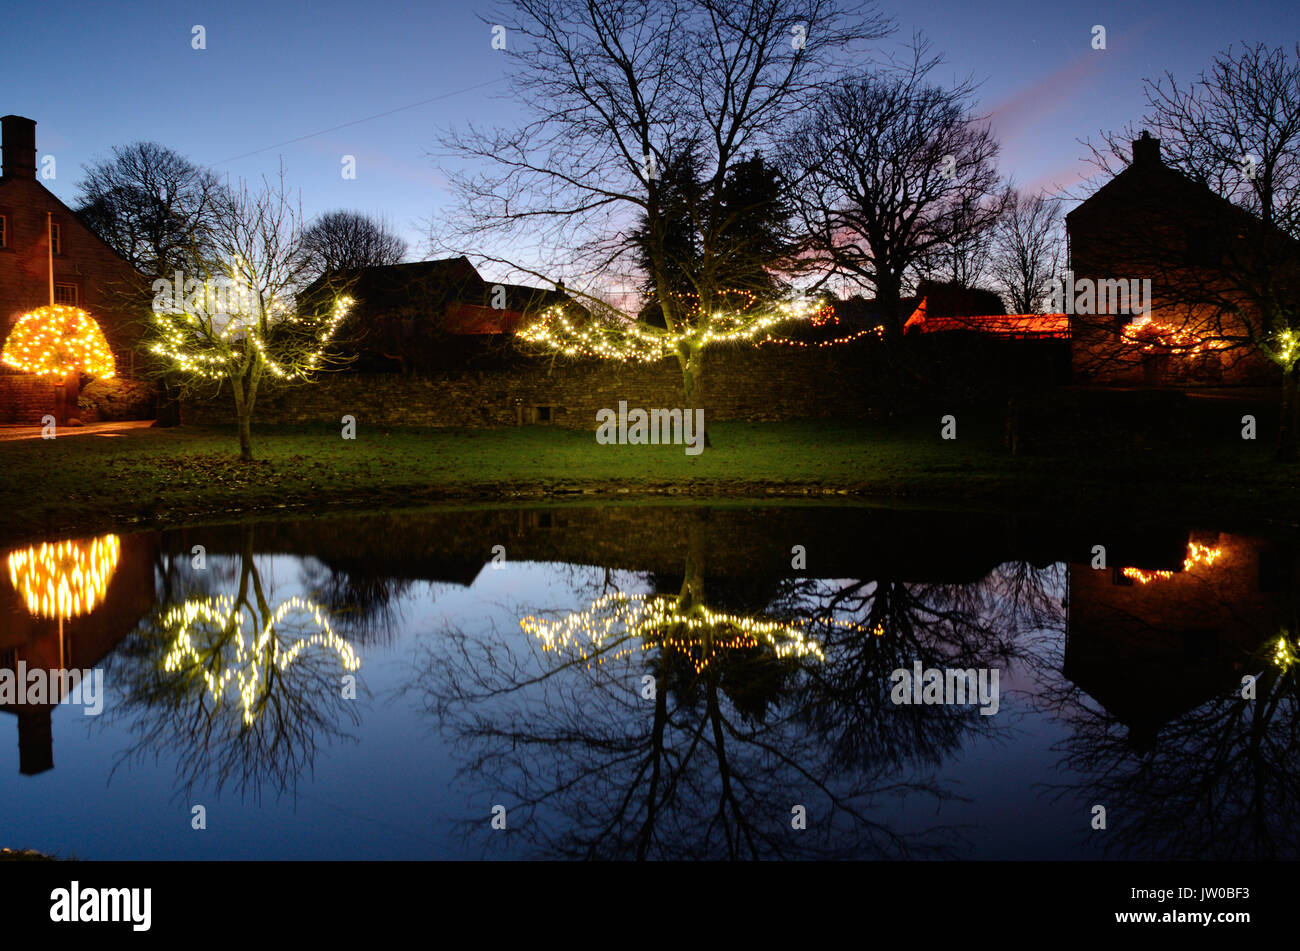 Christmas lights adorn trees around the village pond in Foolow, a scenic village in the Peak District,Derbyshire,England UK - December Stock Photo